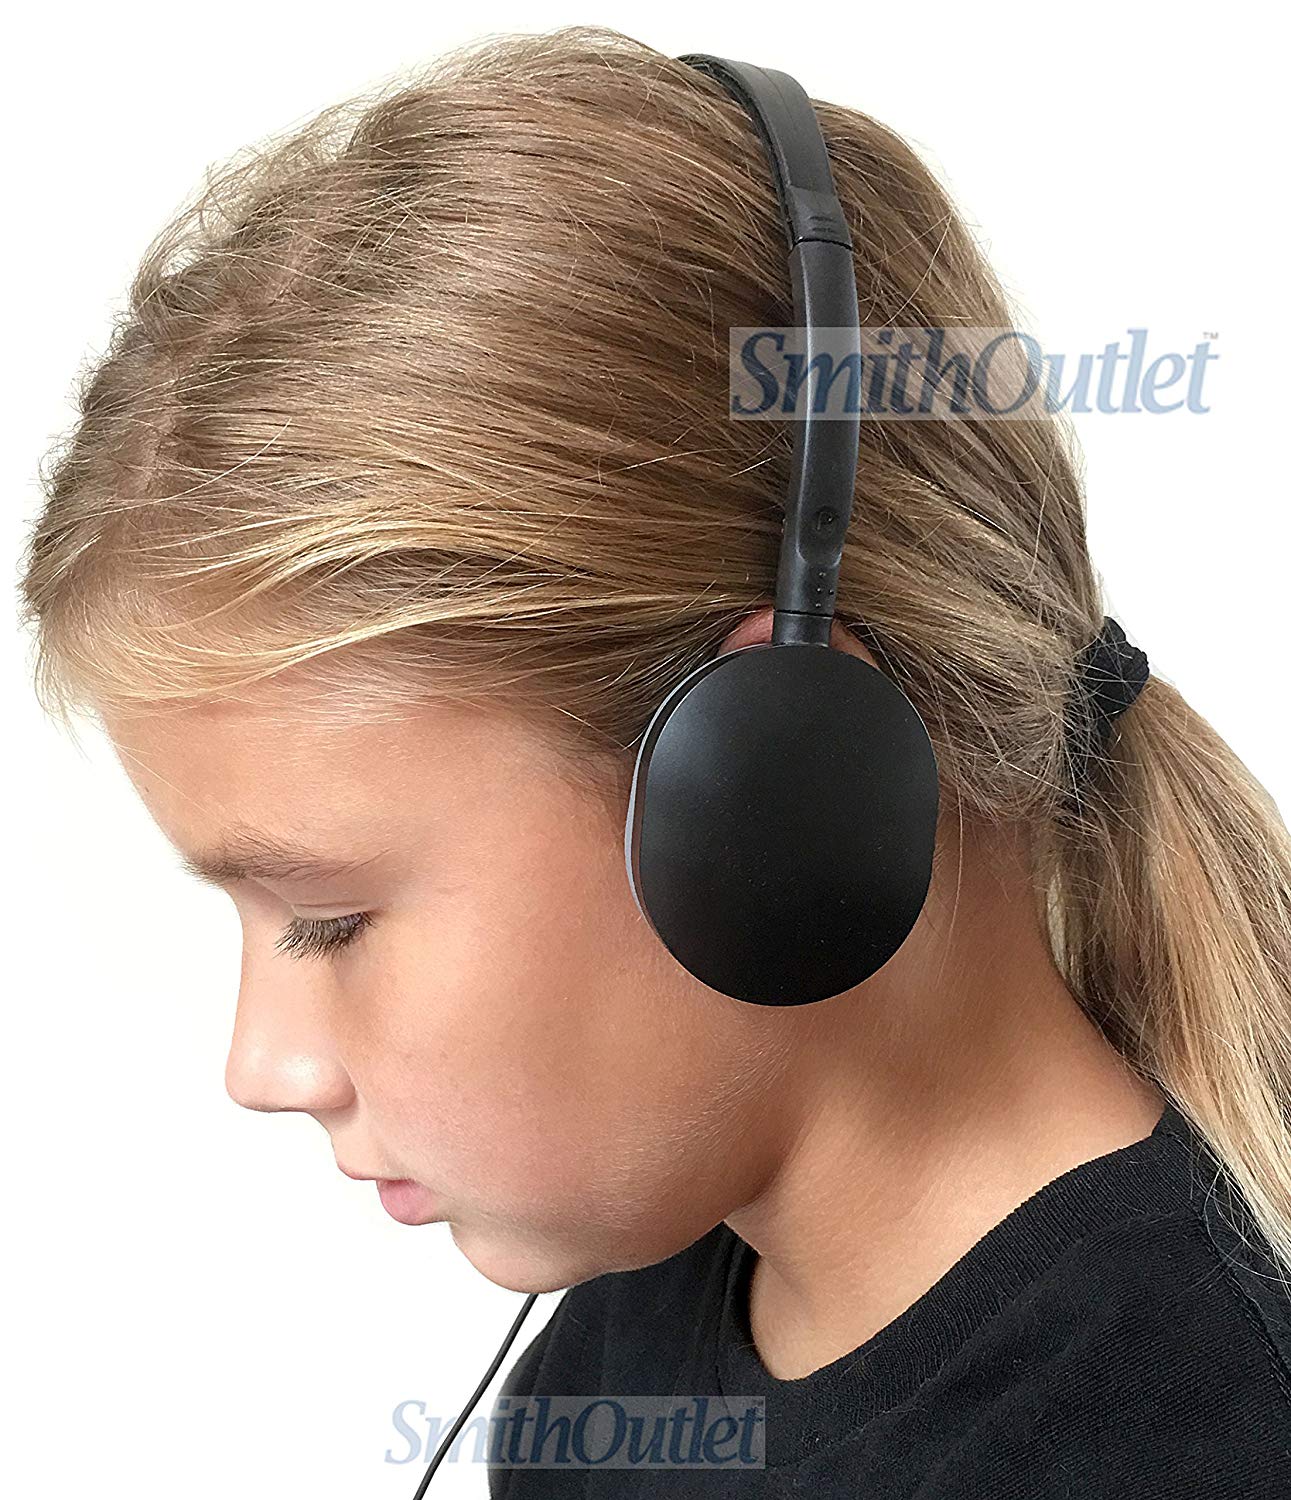 Student Using SmithOutlet Rubber Earpad Headphones in Classroom